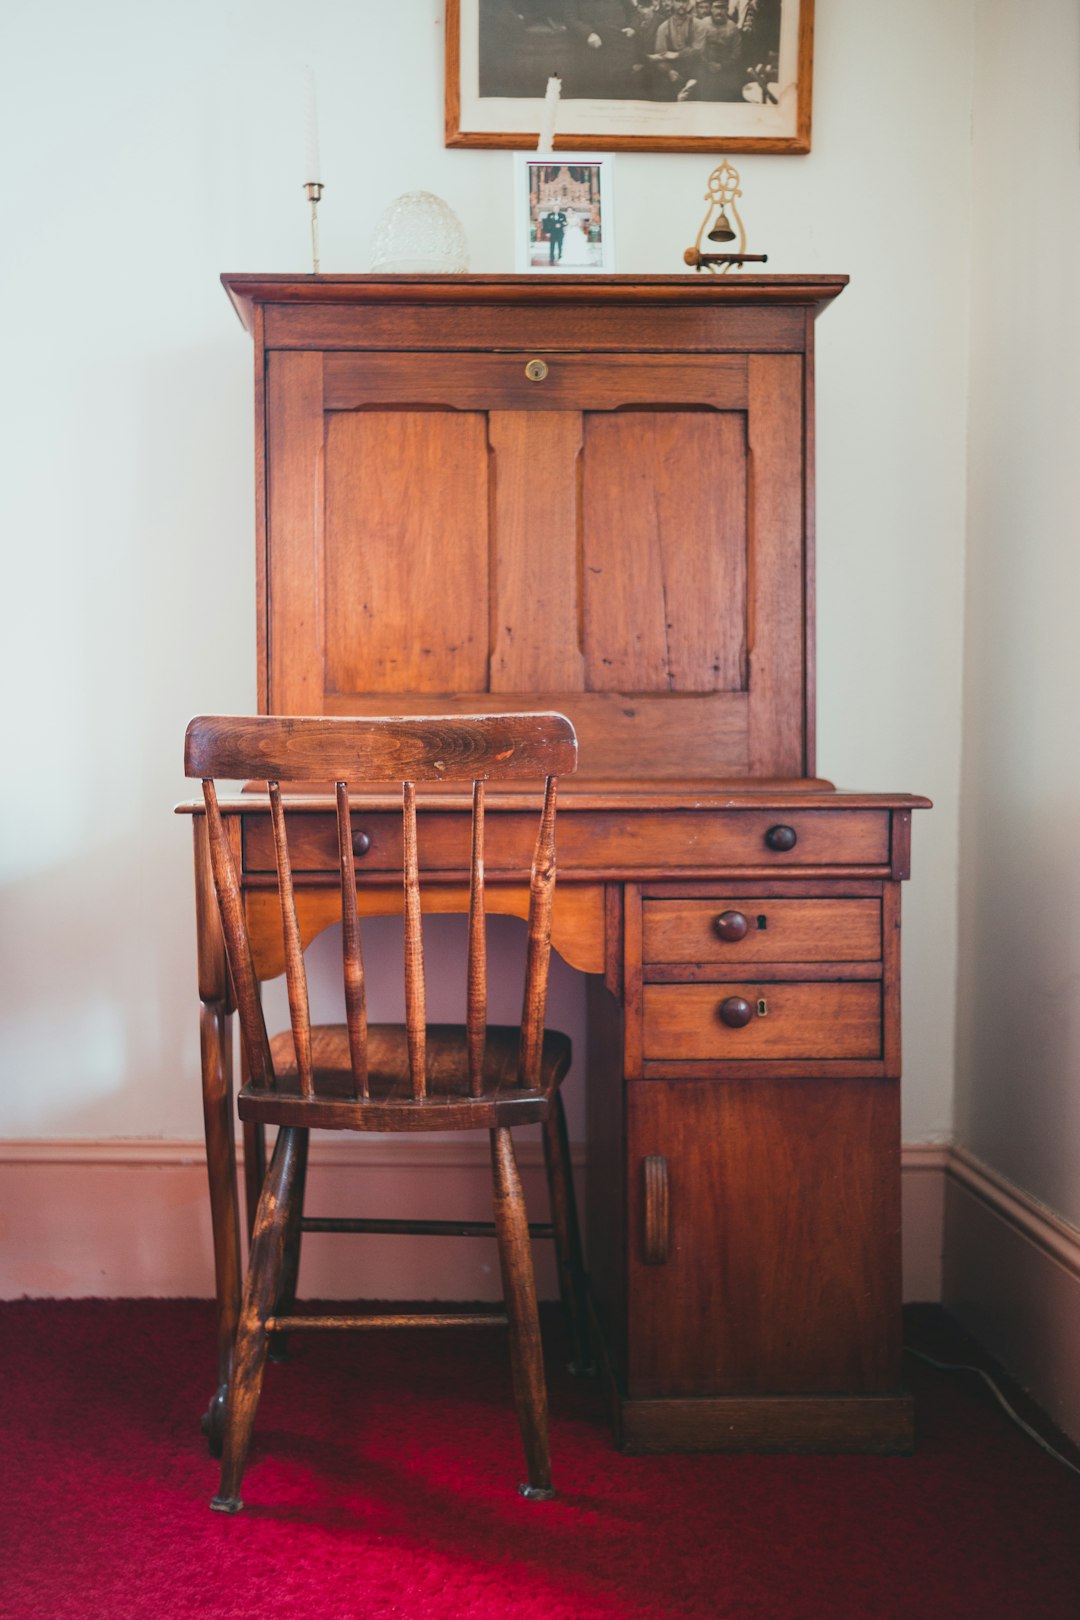 brown wooden chair beside brown wooden cabinet